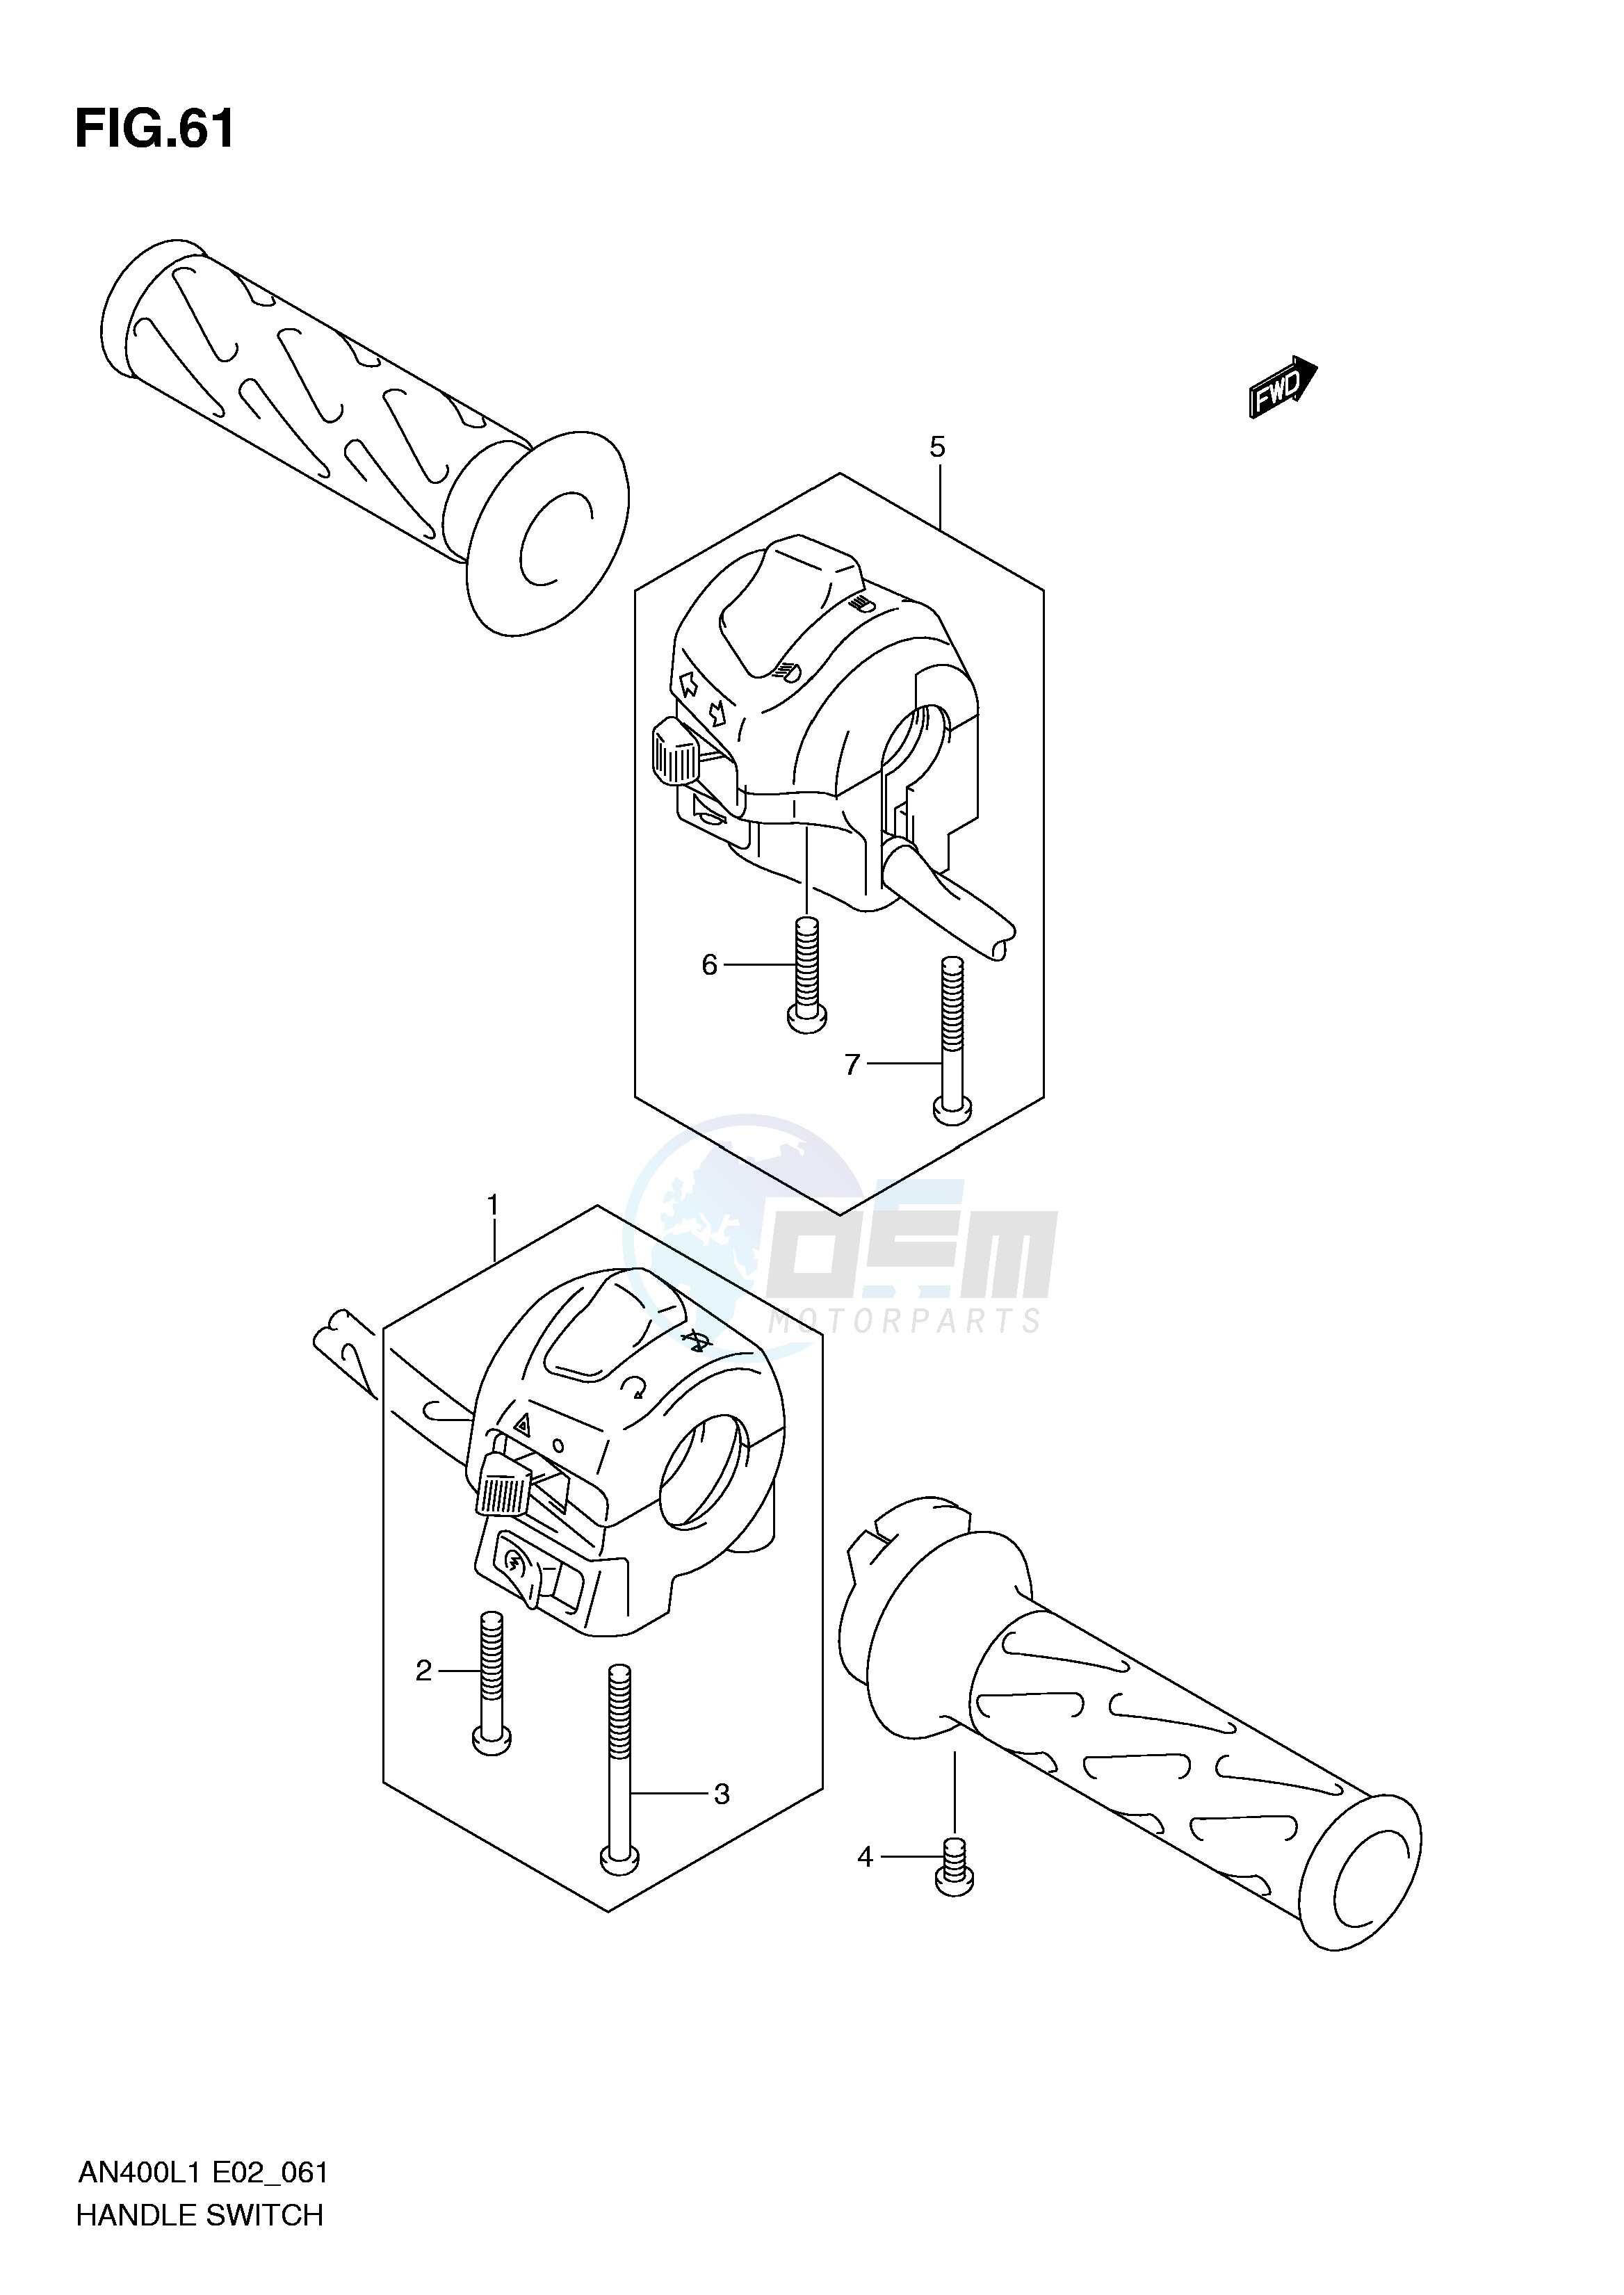 HANDLE SWITCH (AN400L1 E2) image